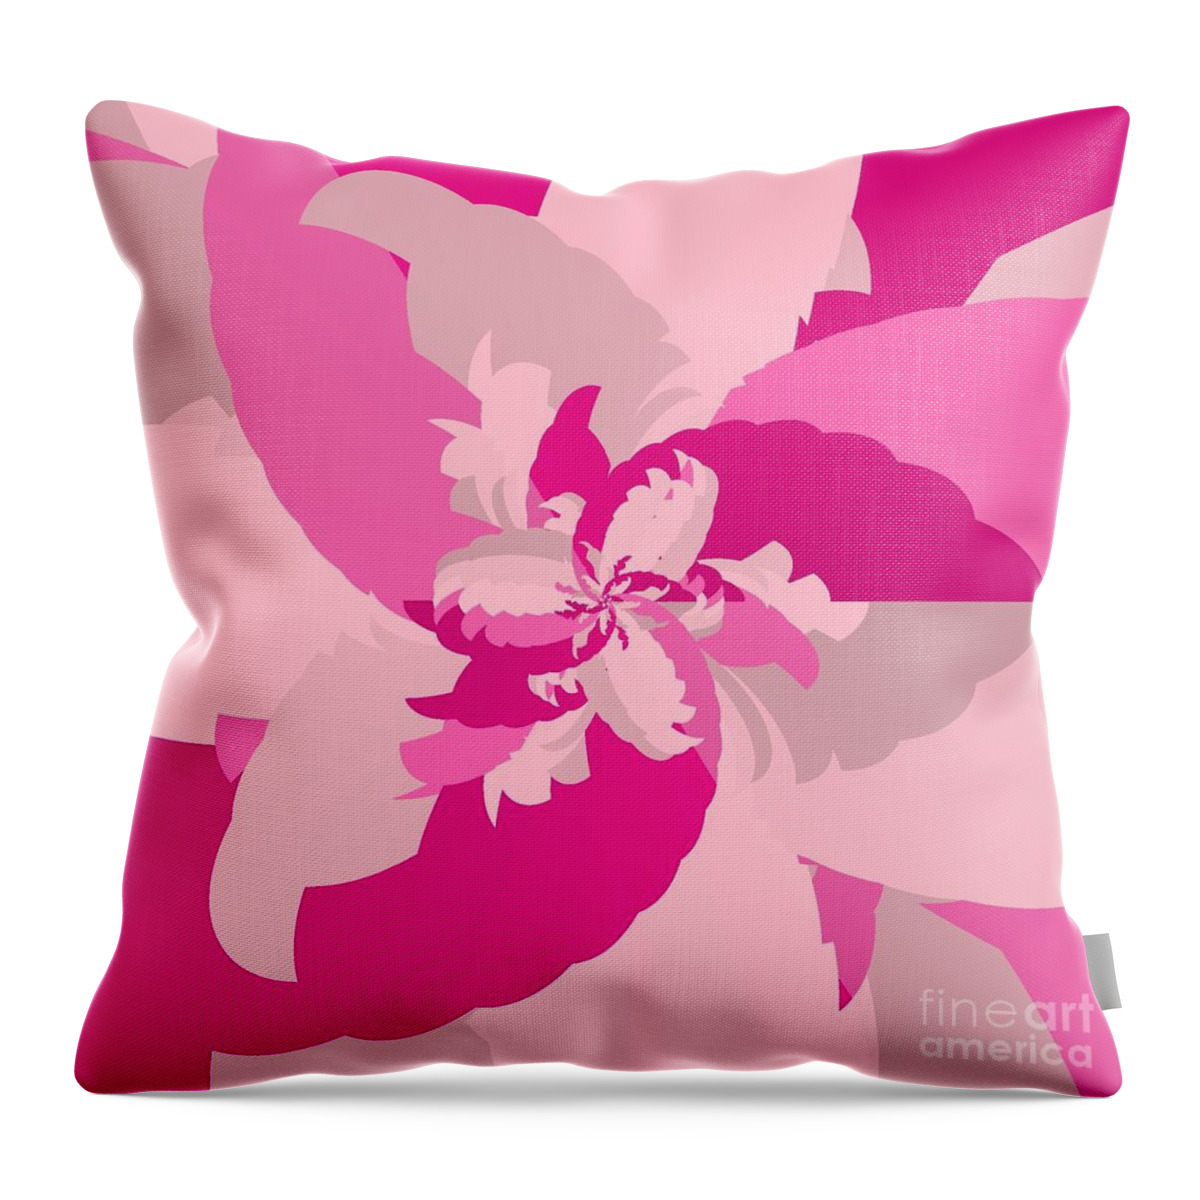 Tropical Pink Throw Pillow featuring the digital art Tropical Pink by Michael Skinner